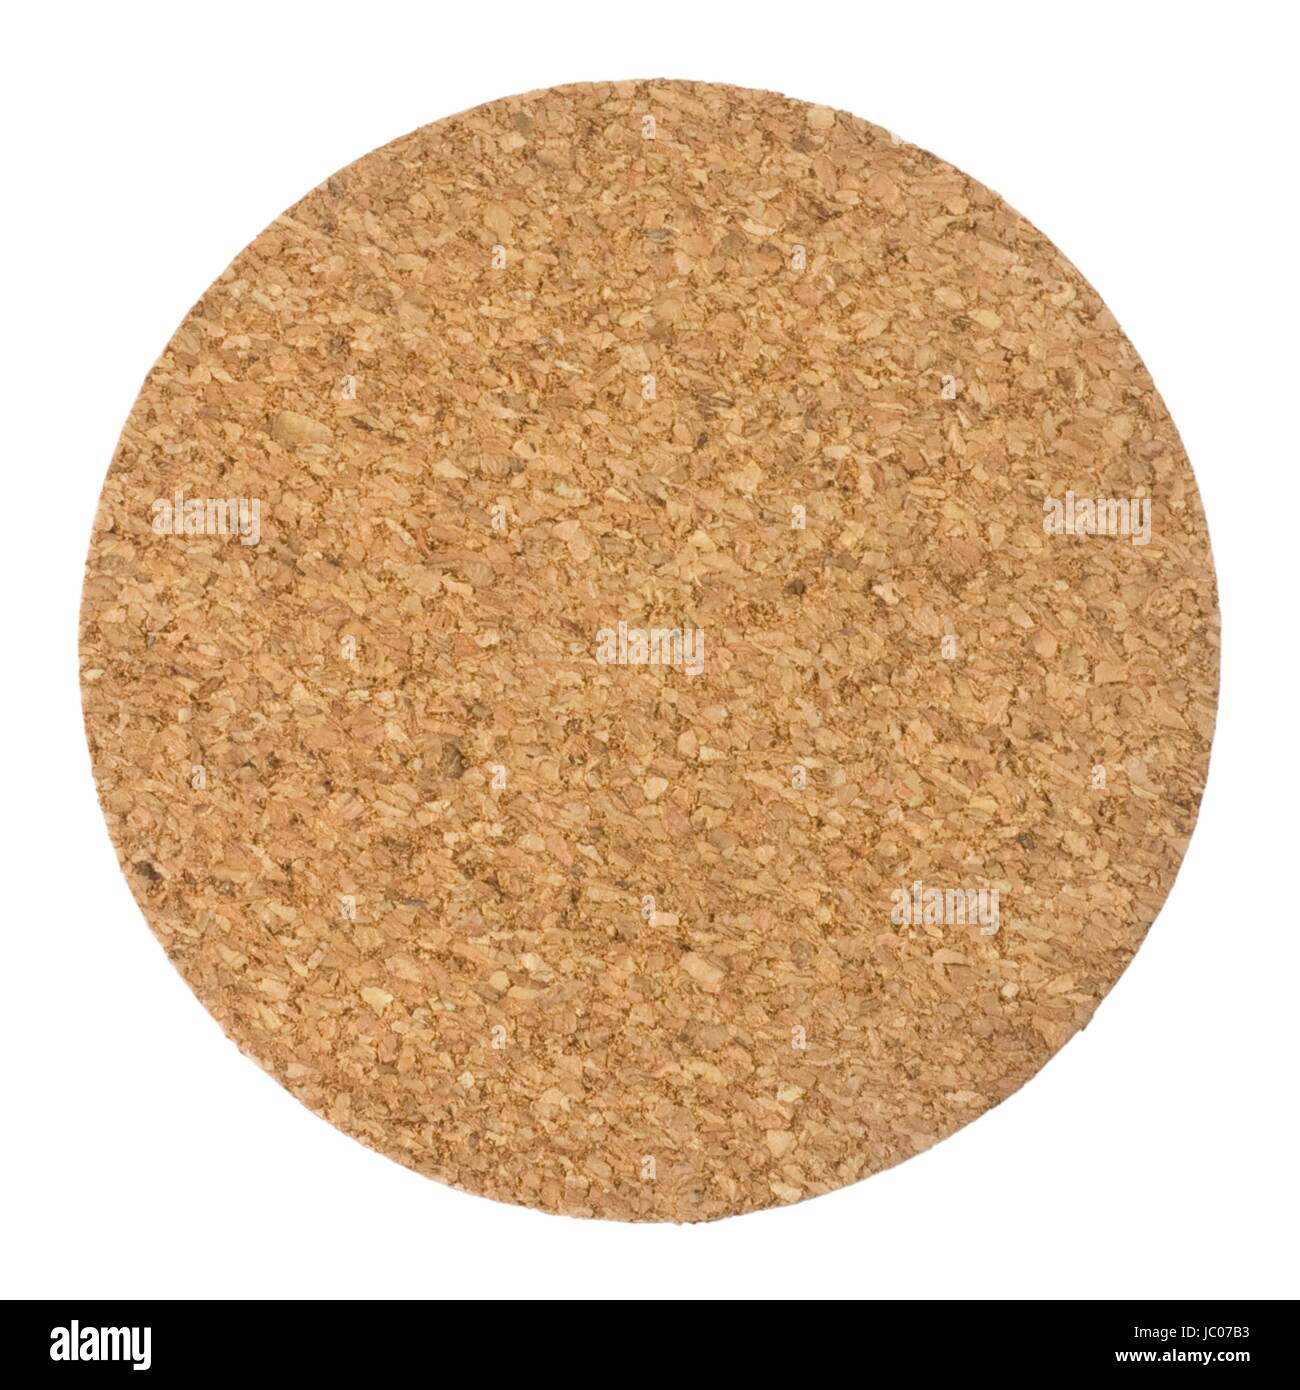 Background Pattern, Brown Round Cork Coaster Isolated on A White Background. Stock Photo